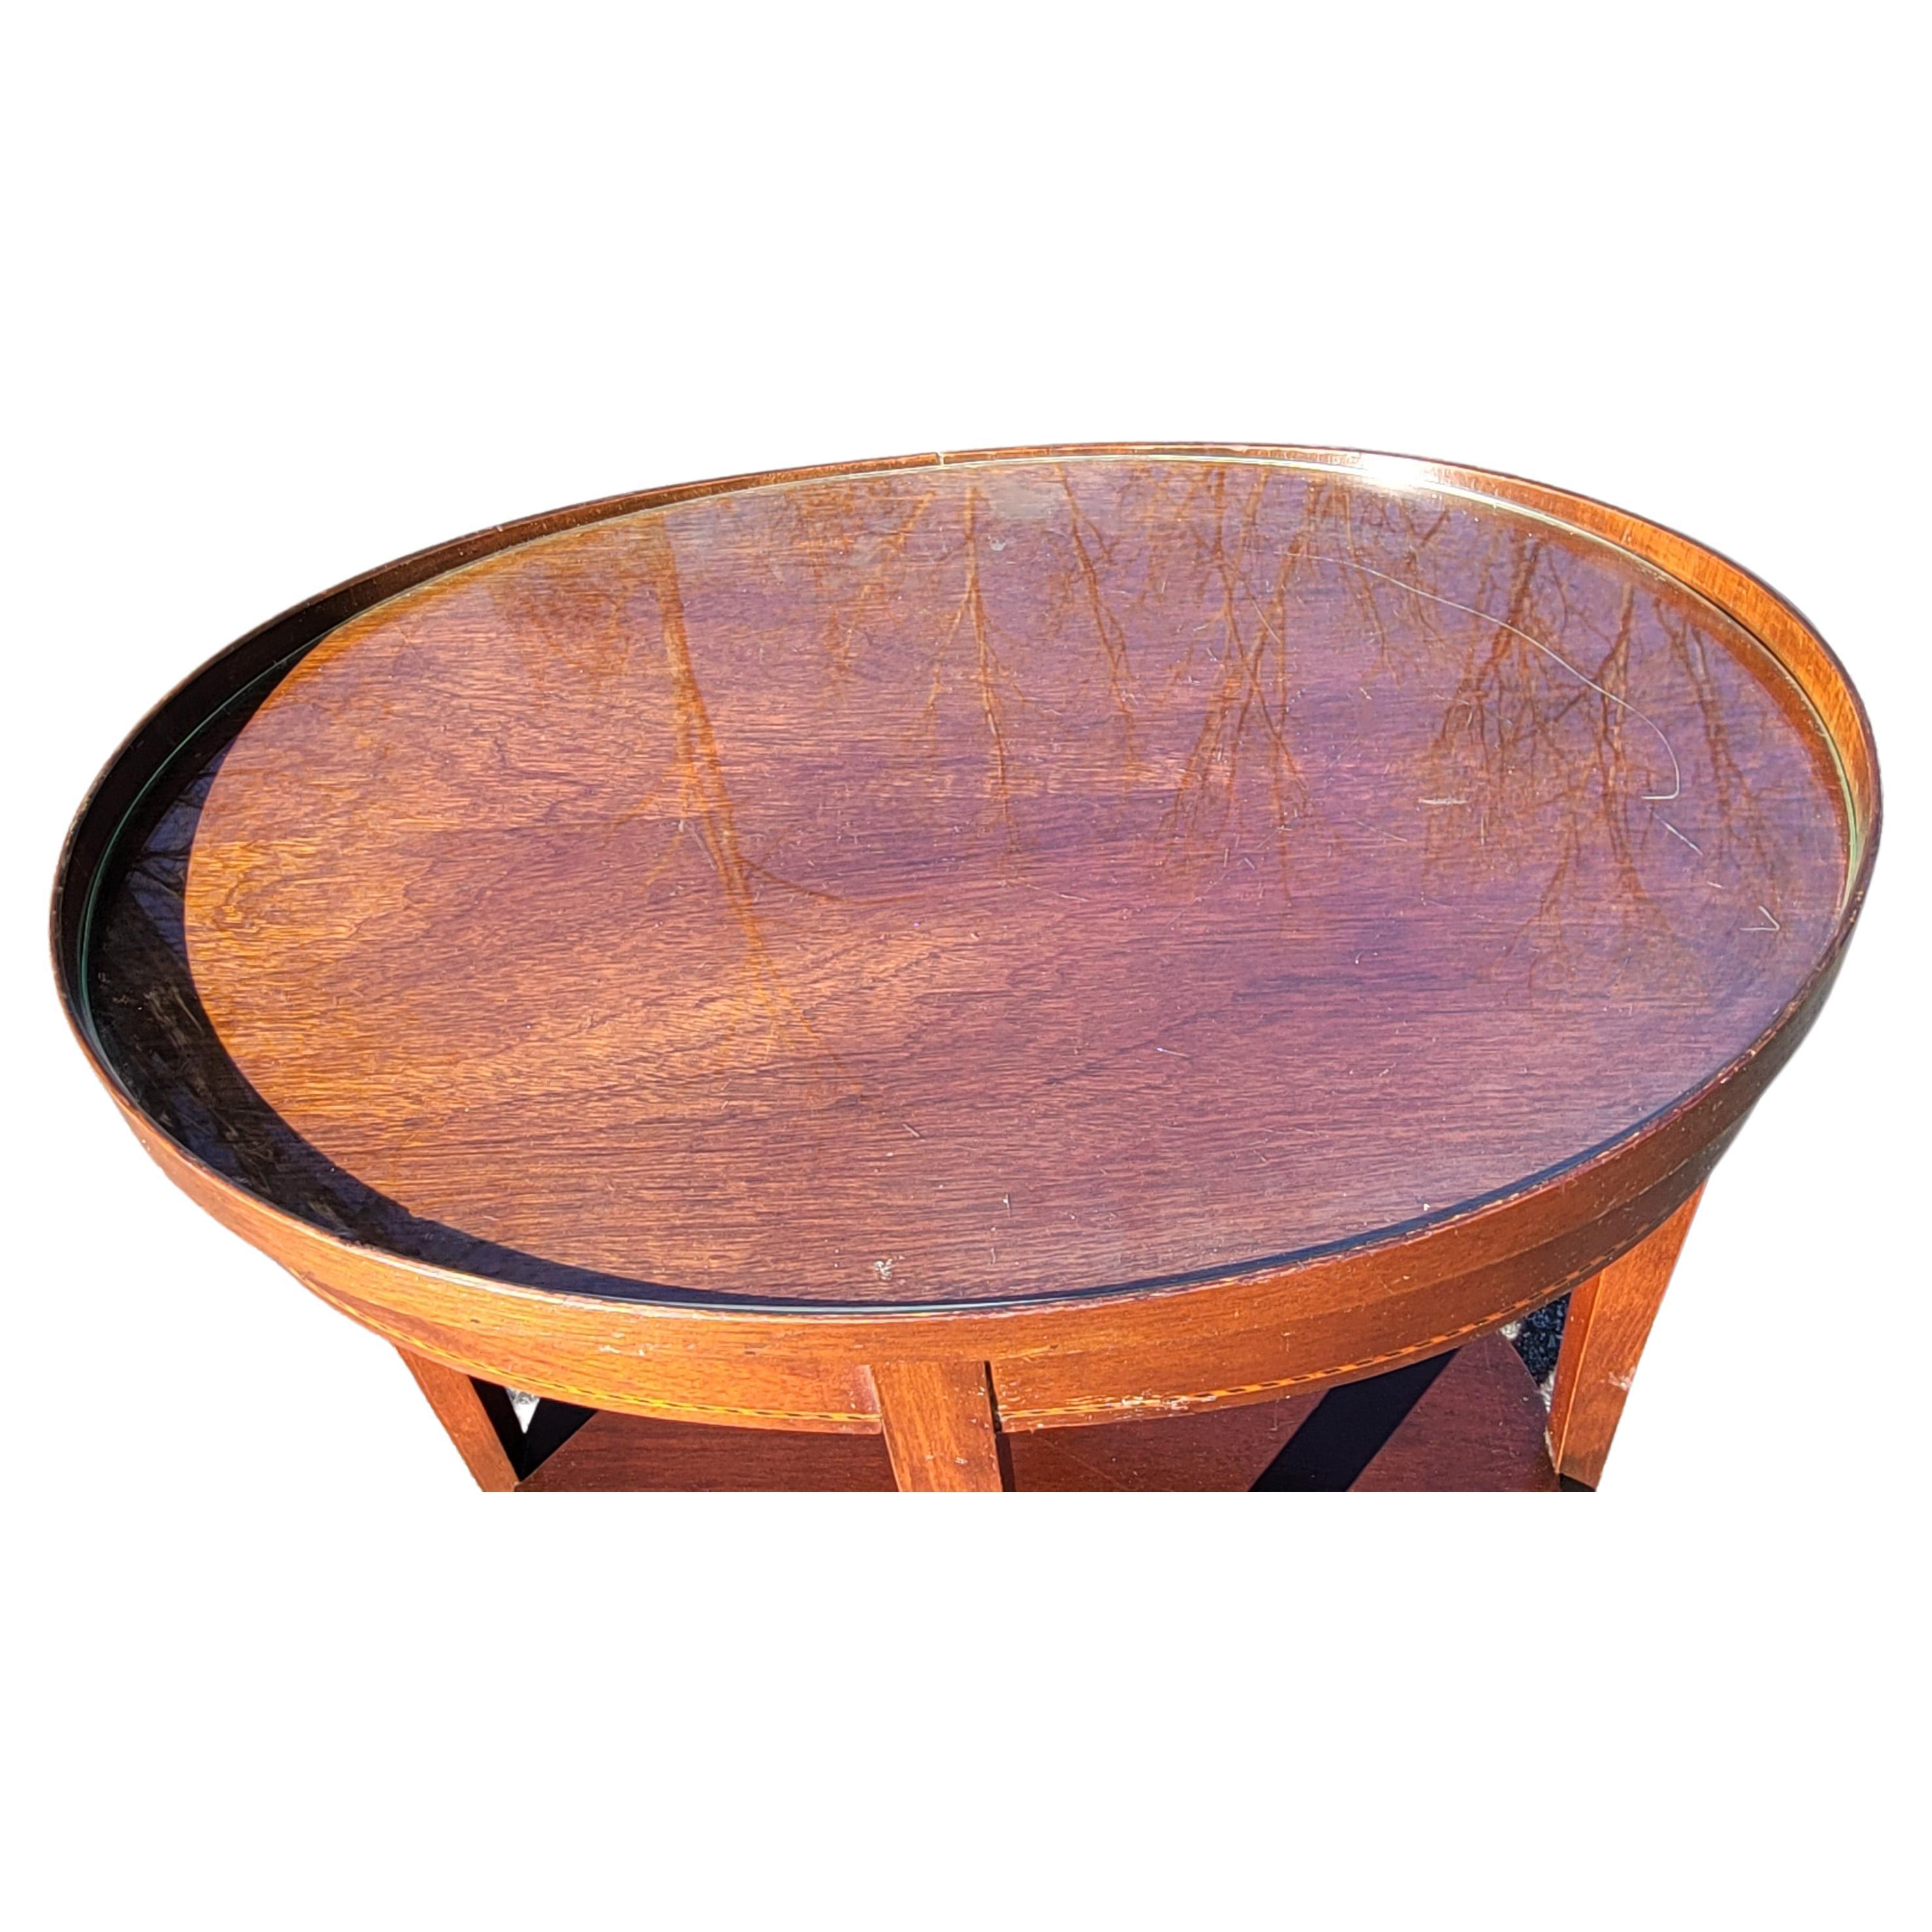 American Mersman Tiered Mahogany Inlay Oval Side Table W/ Protective Glass Top For Sale